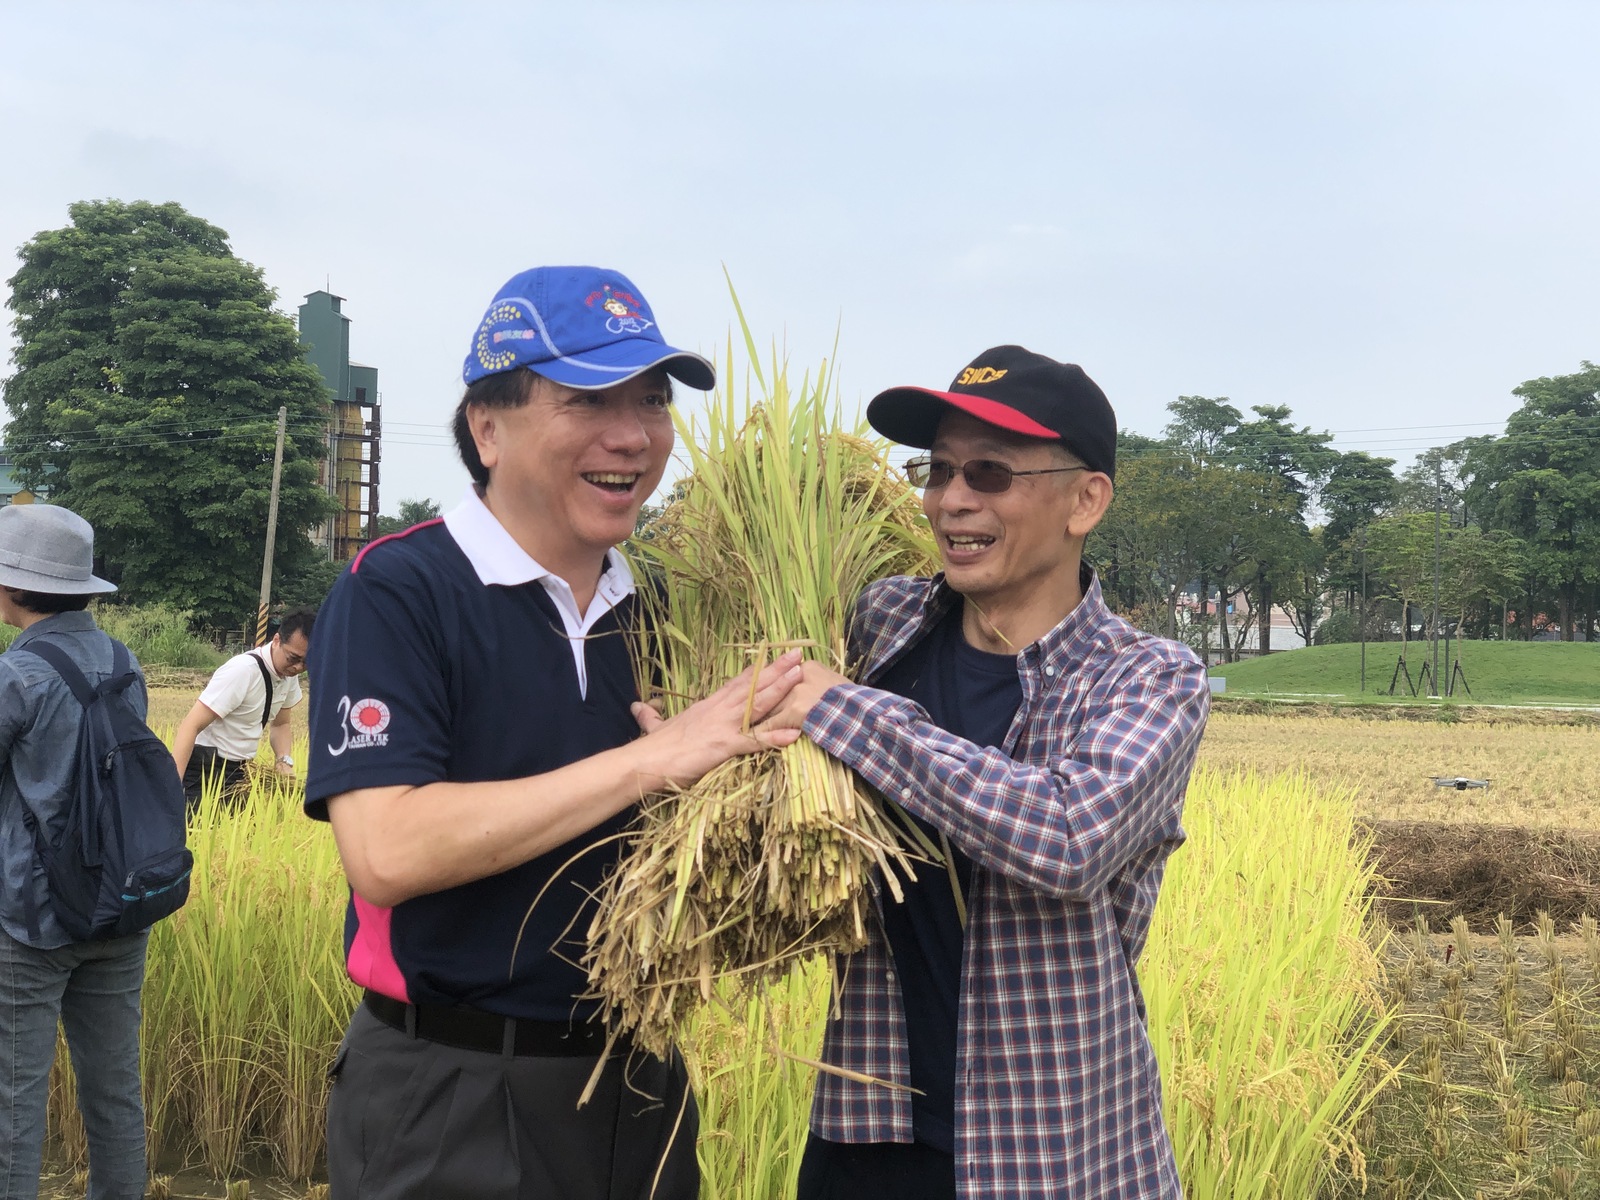 USR project by the College of Management organized a farming activity with LaserTek Taiwan. On the left is Chairman of Laser Tek Taiwan Gary Cheng; on the right is Associate Dean of the College of Management Professor Jui-Kun Kuo. (Photo from NSYSU files)